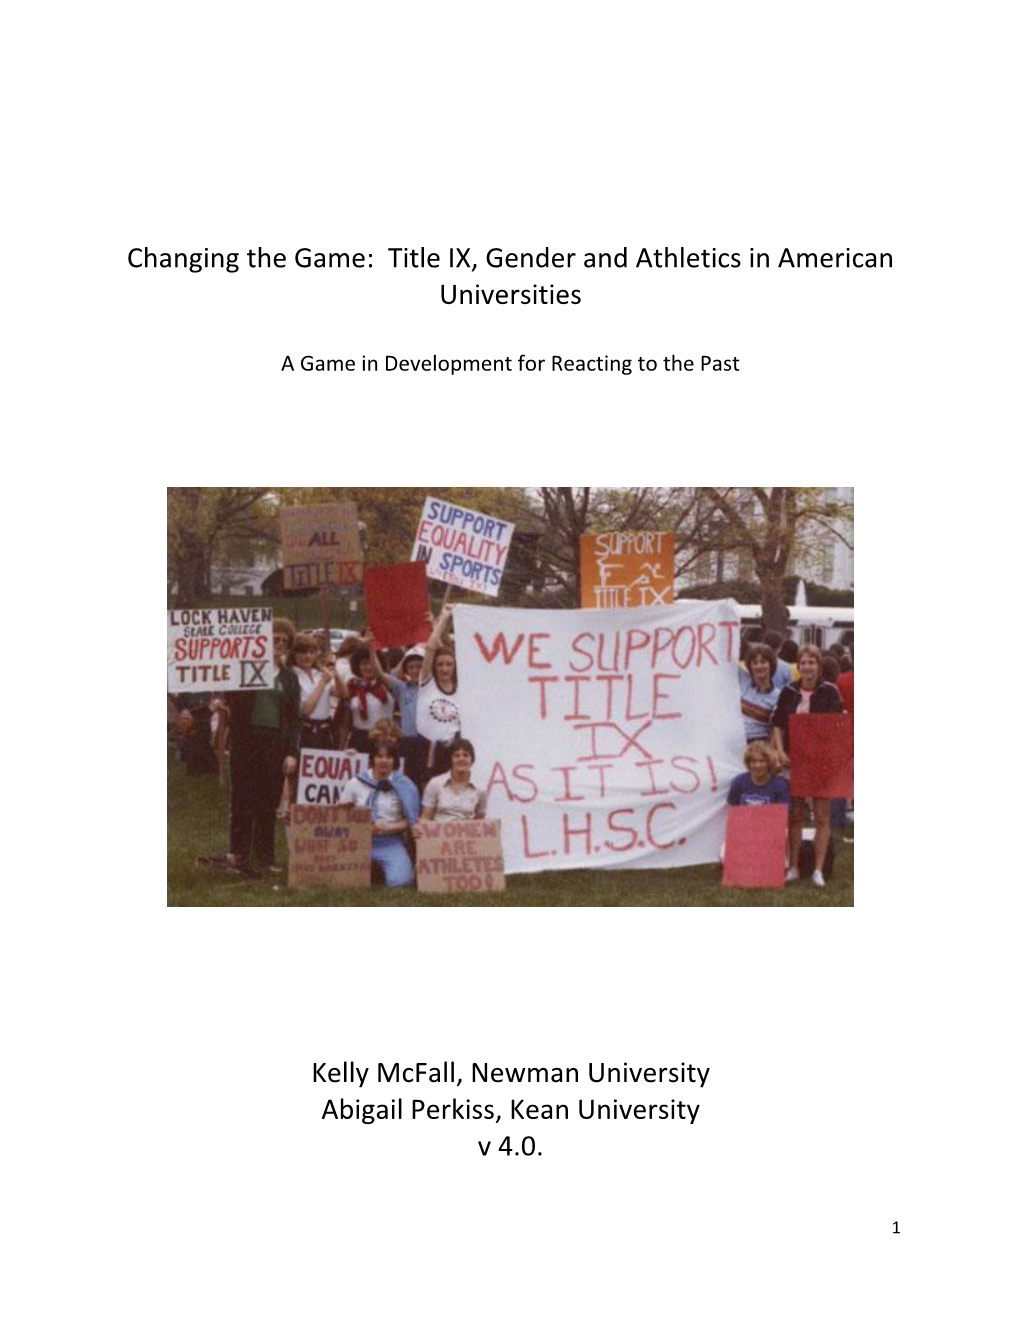 Changing the Game: Title IX, Gender and Athletics in American Universities